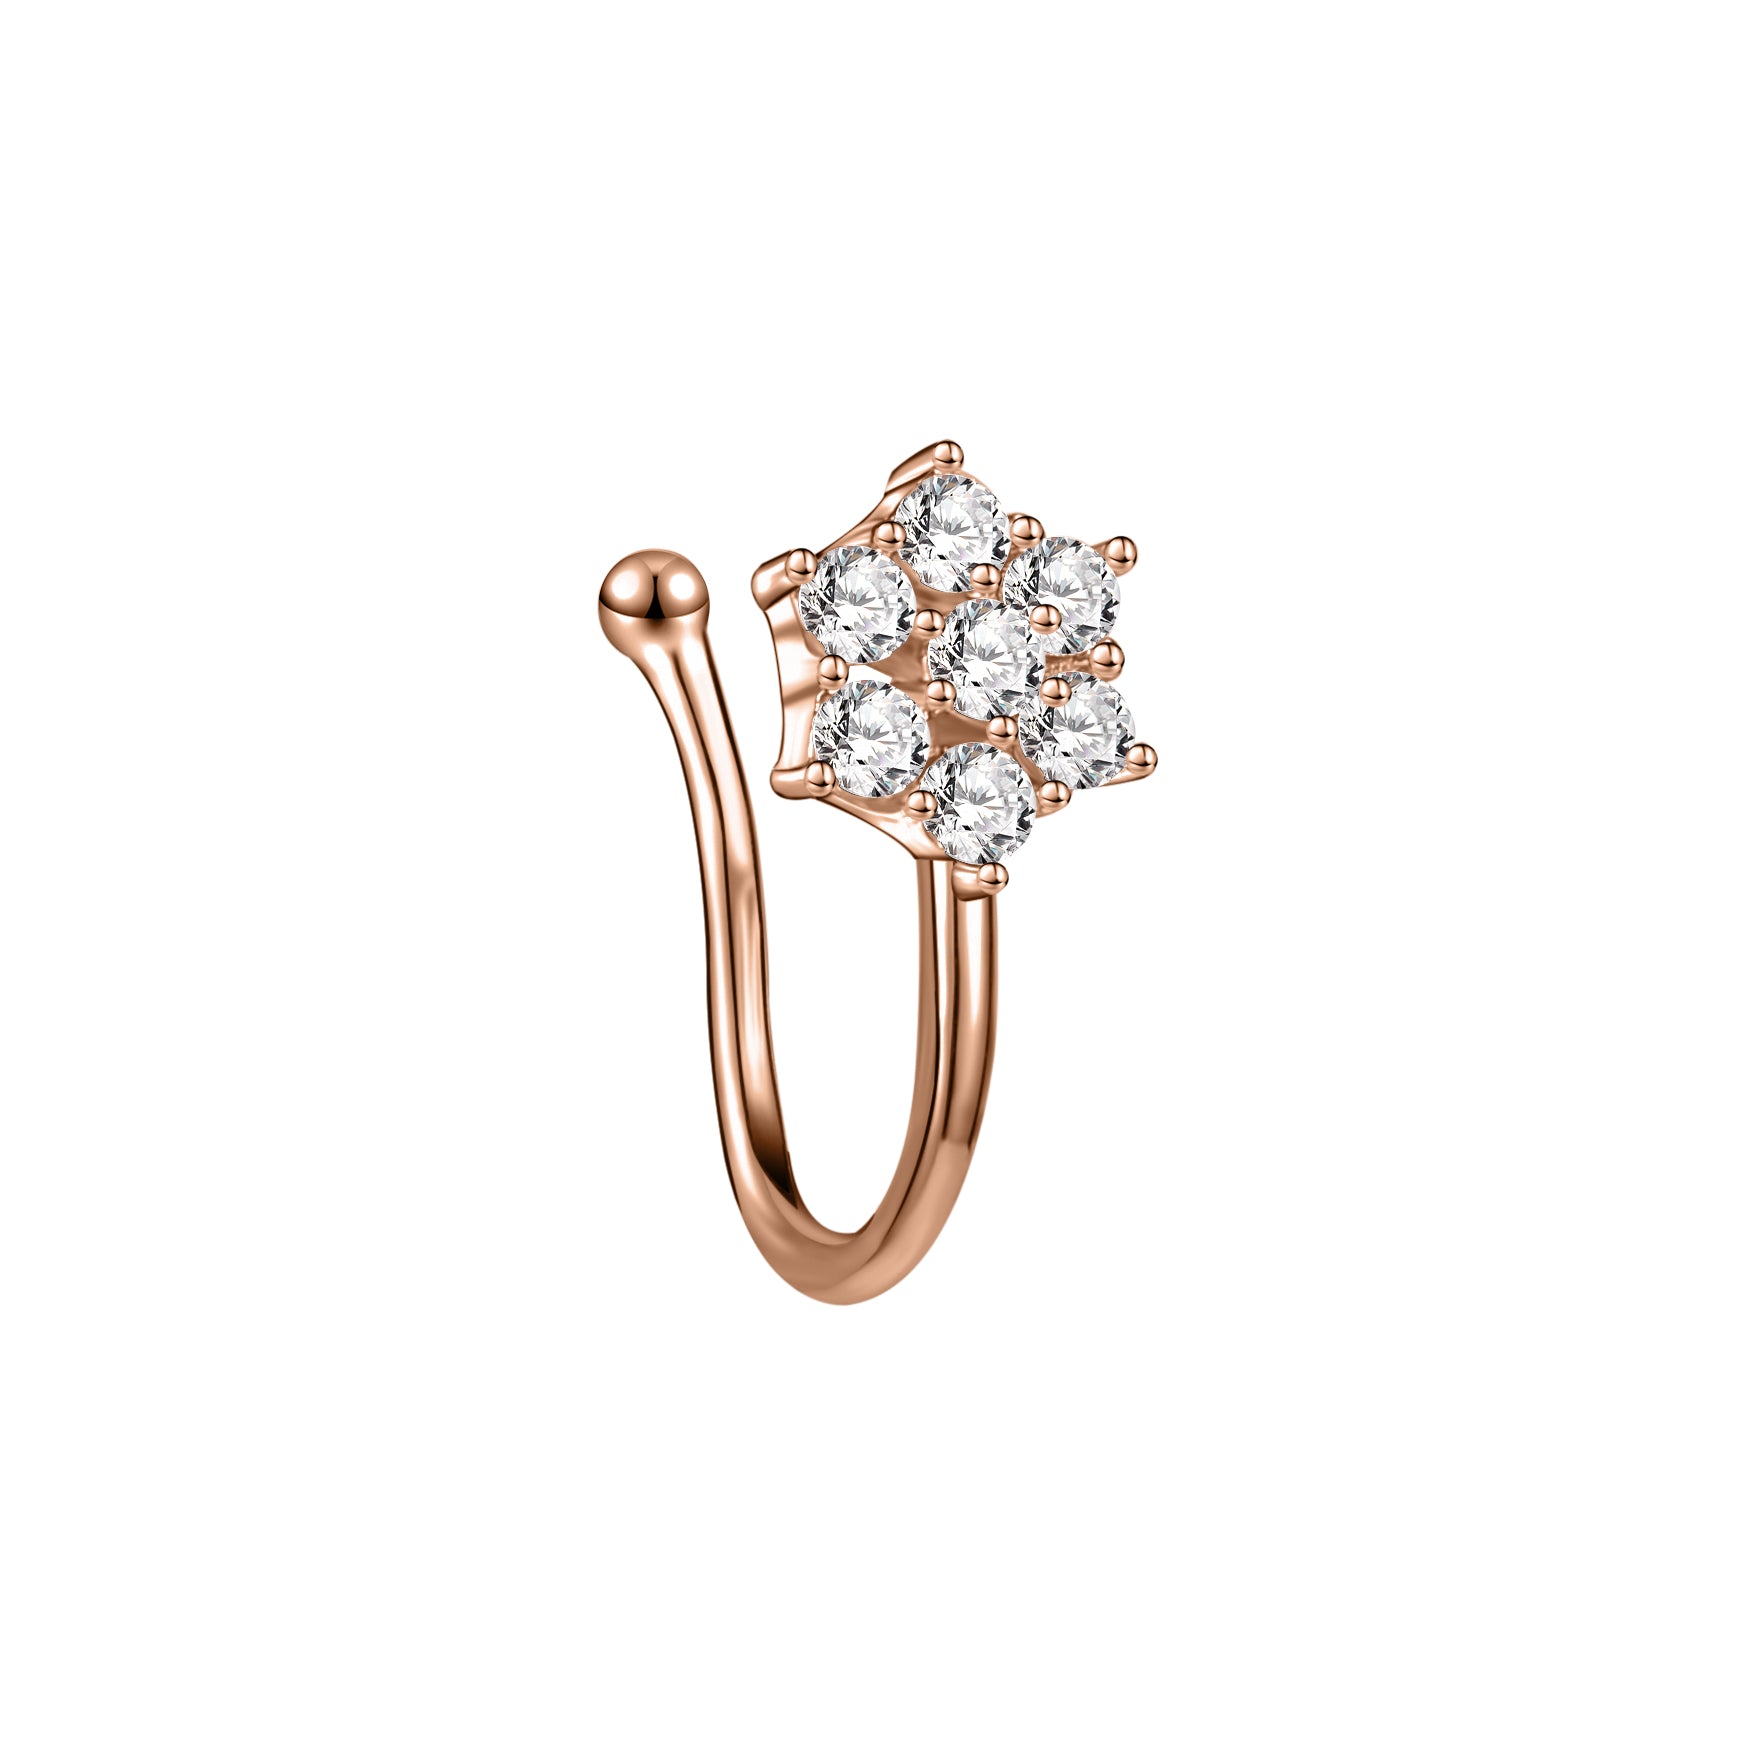 zs-white-zircon-flower-u-shaped-nose-clip-simple-stainless-steel-fake-nose-ring